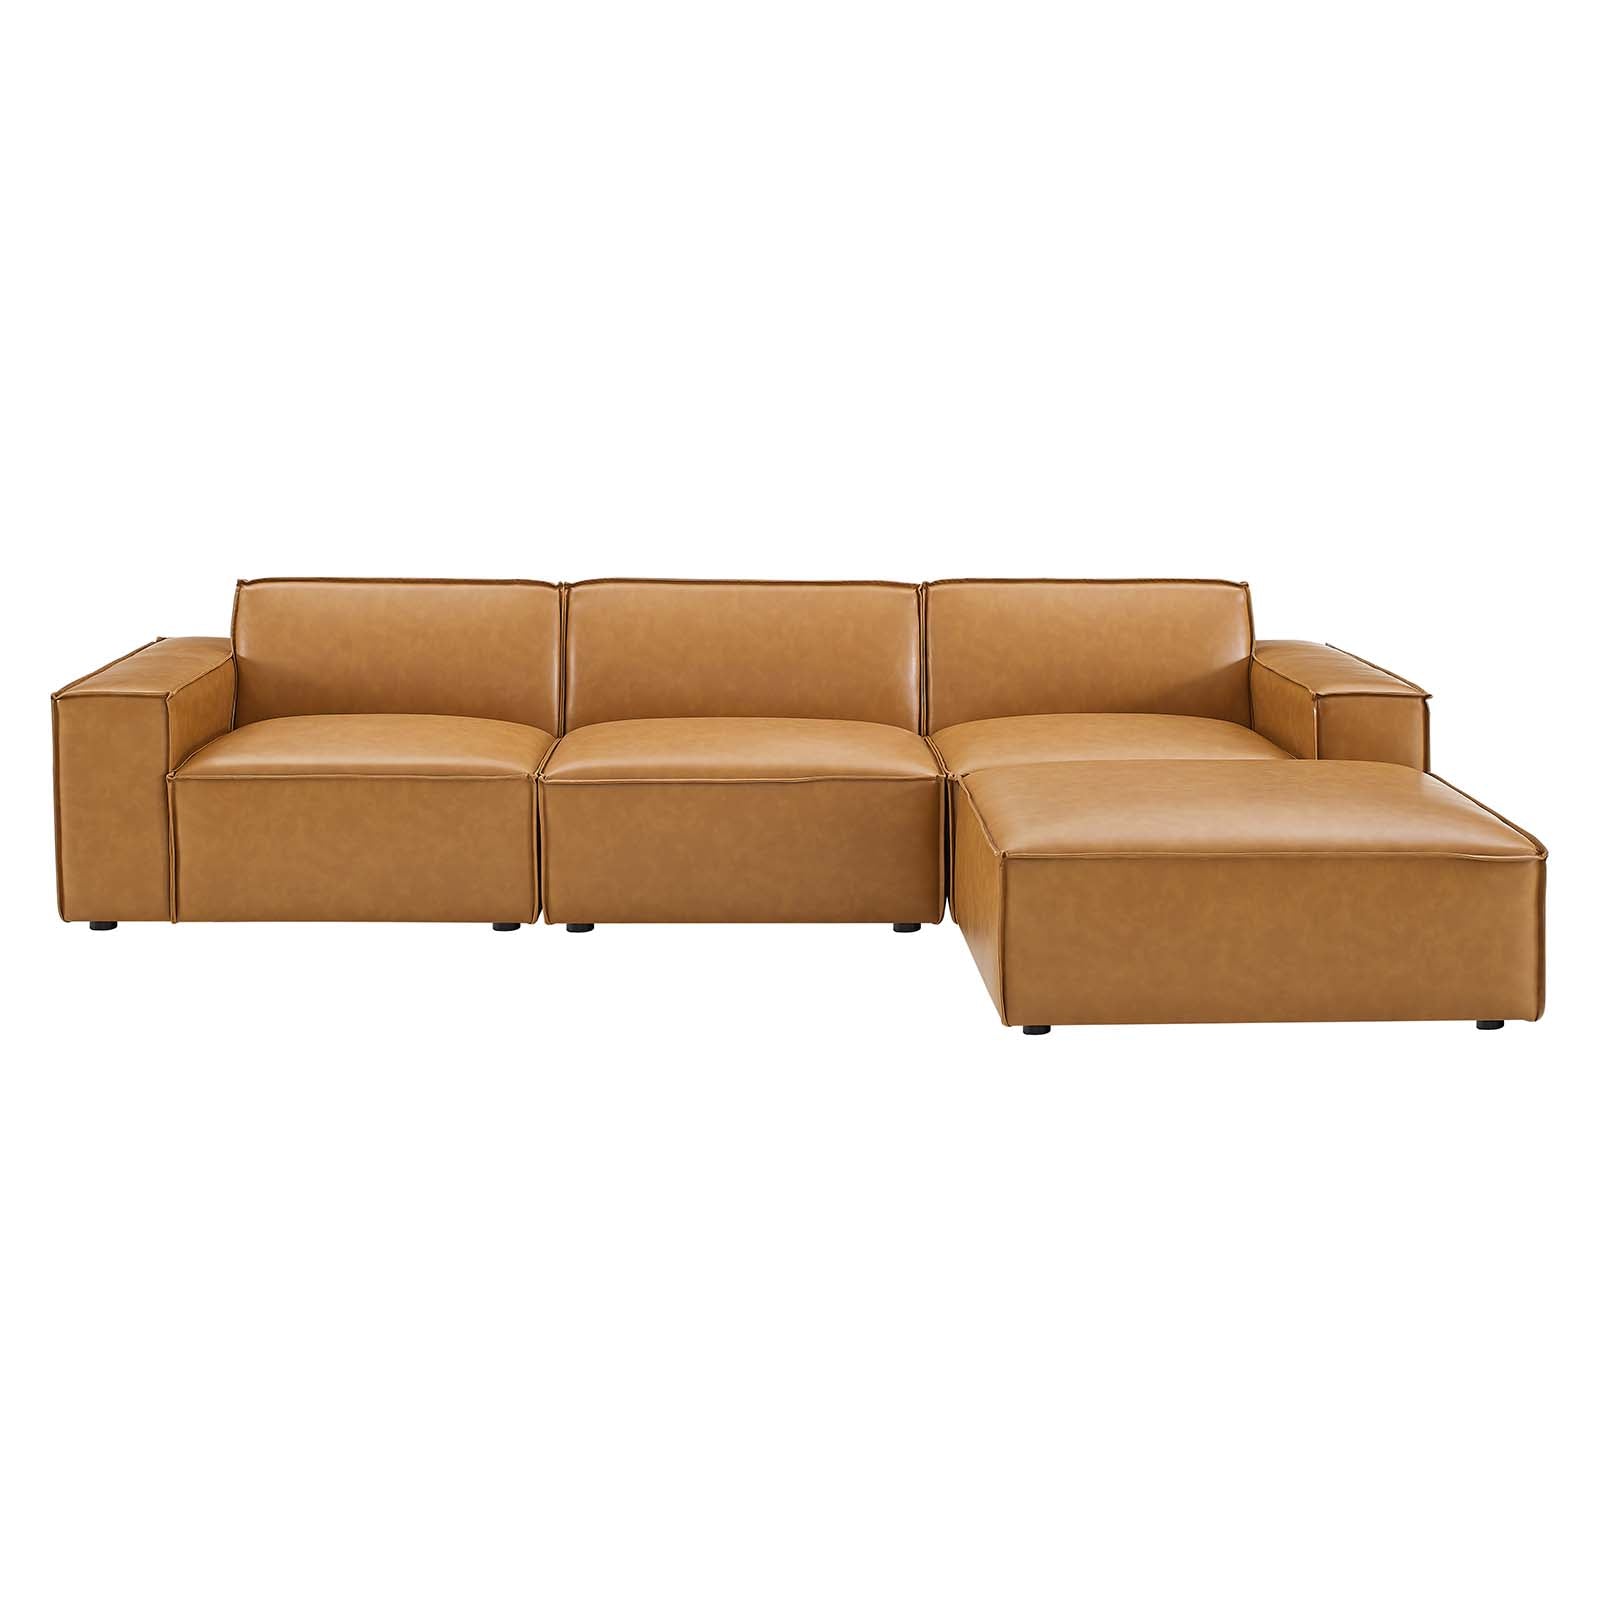 Modway Sectional Sofas - Restore 4-Piece Vegan Leather Sectional Sofa Tan